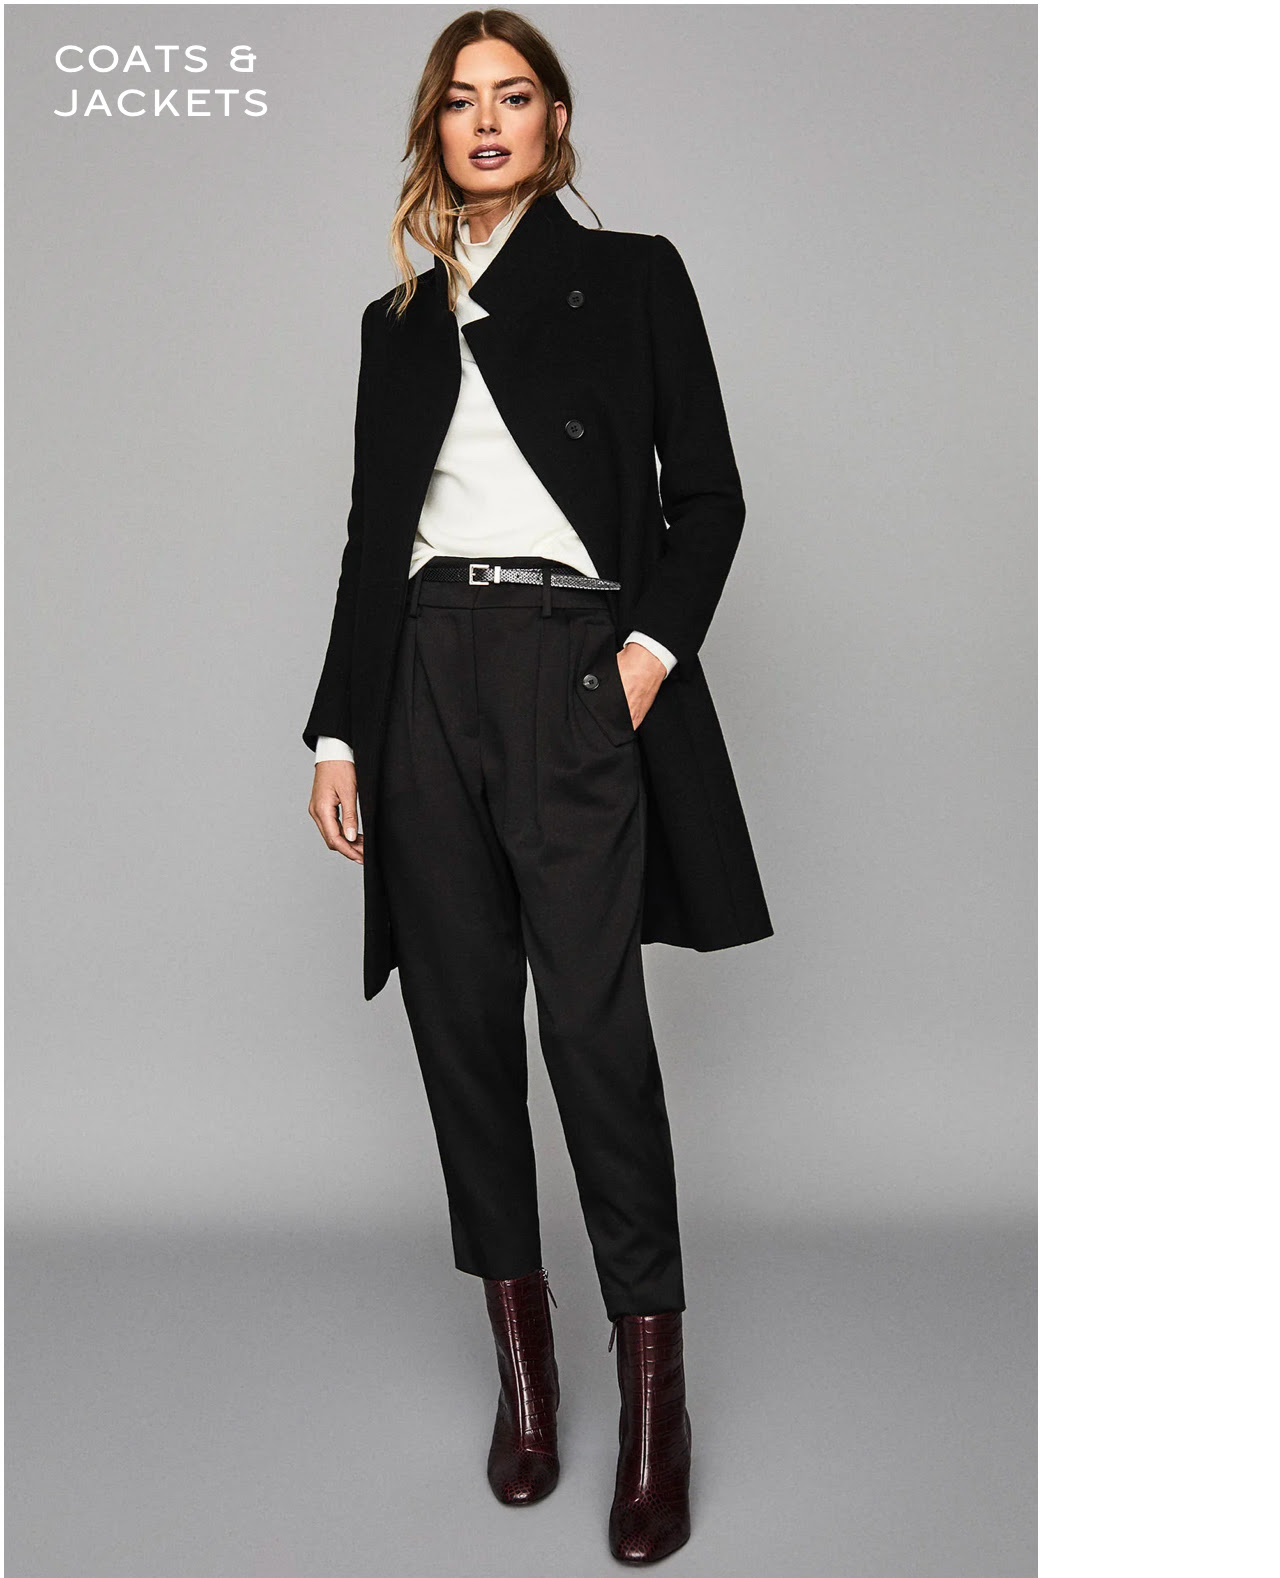 REISS - Sale By Category - Up To 50% Off